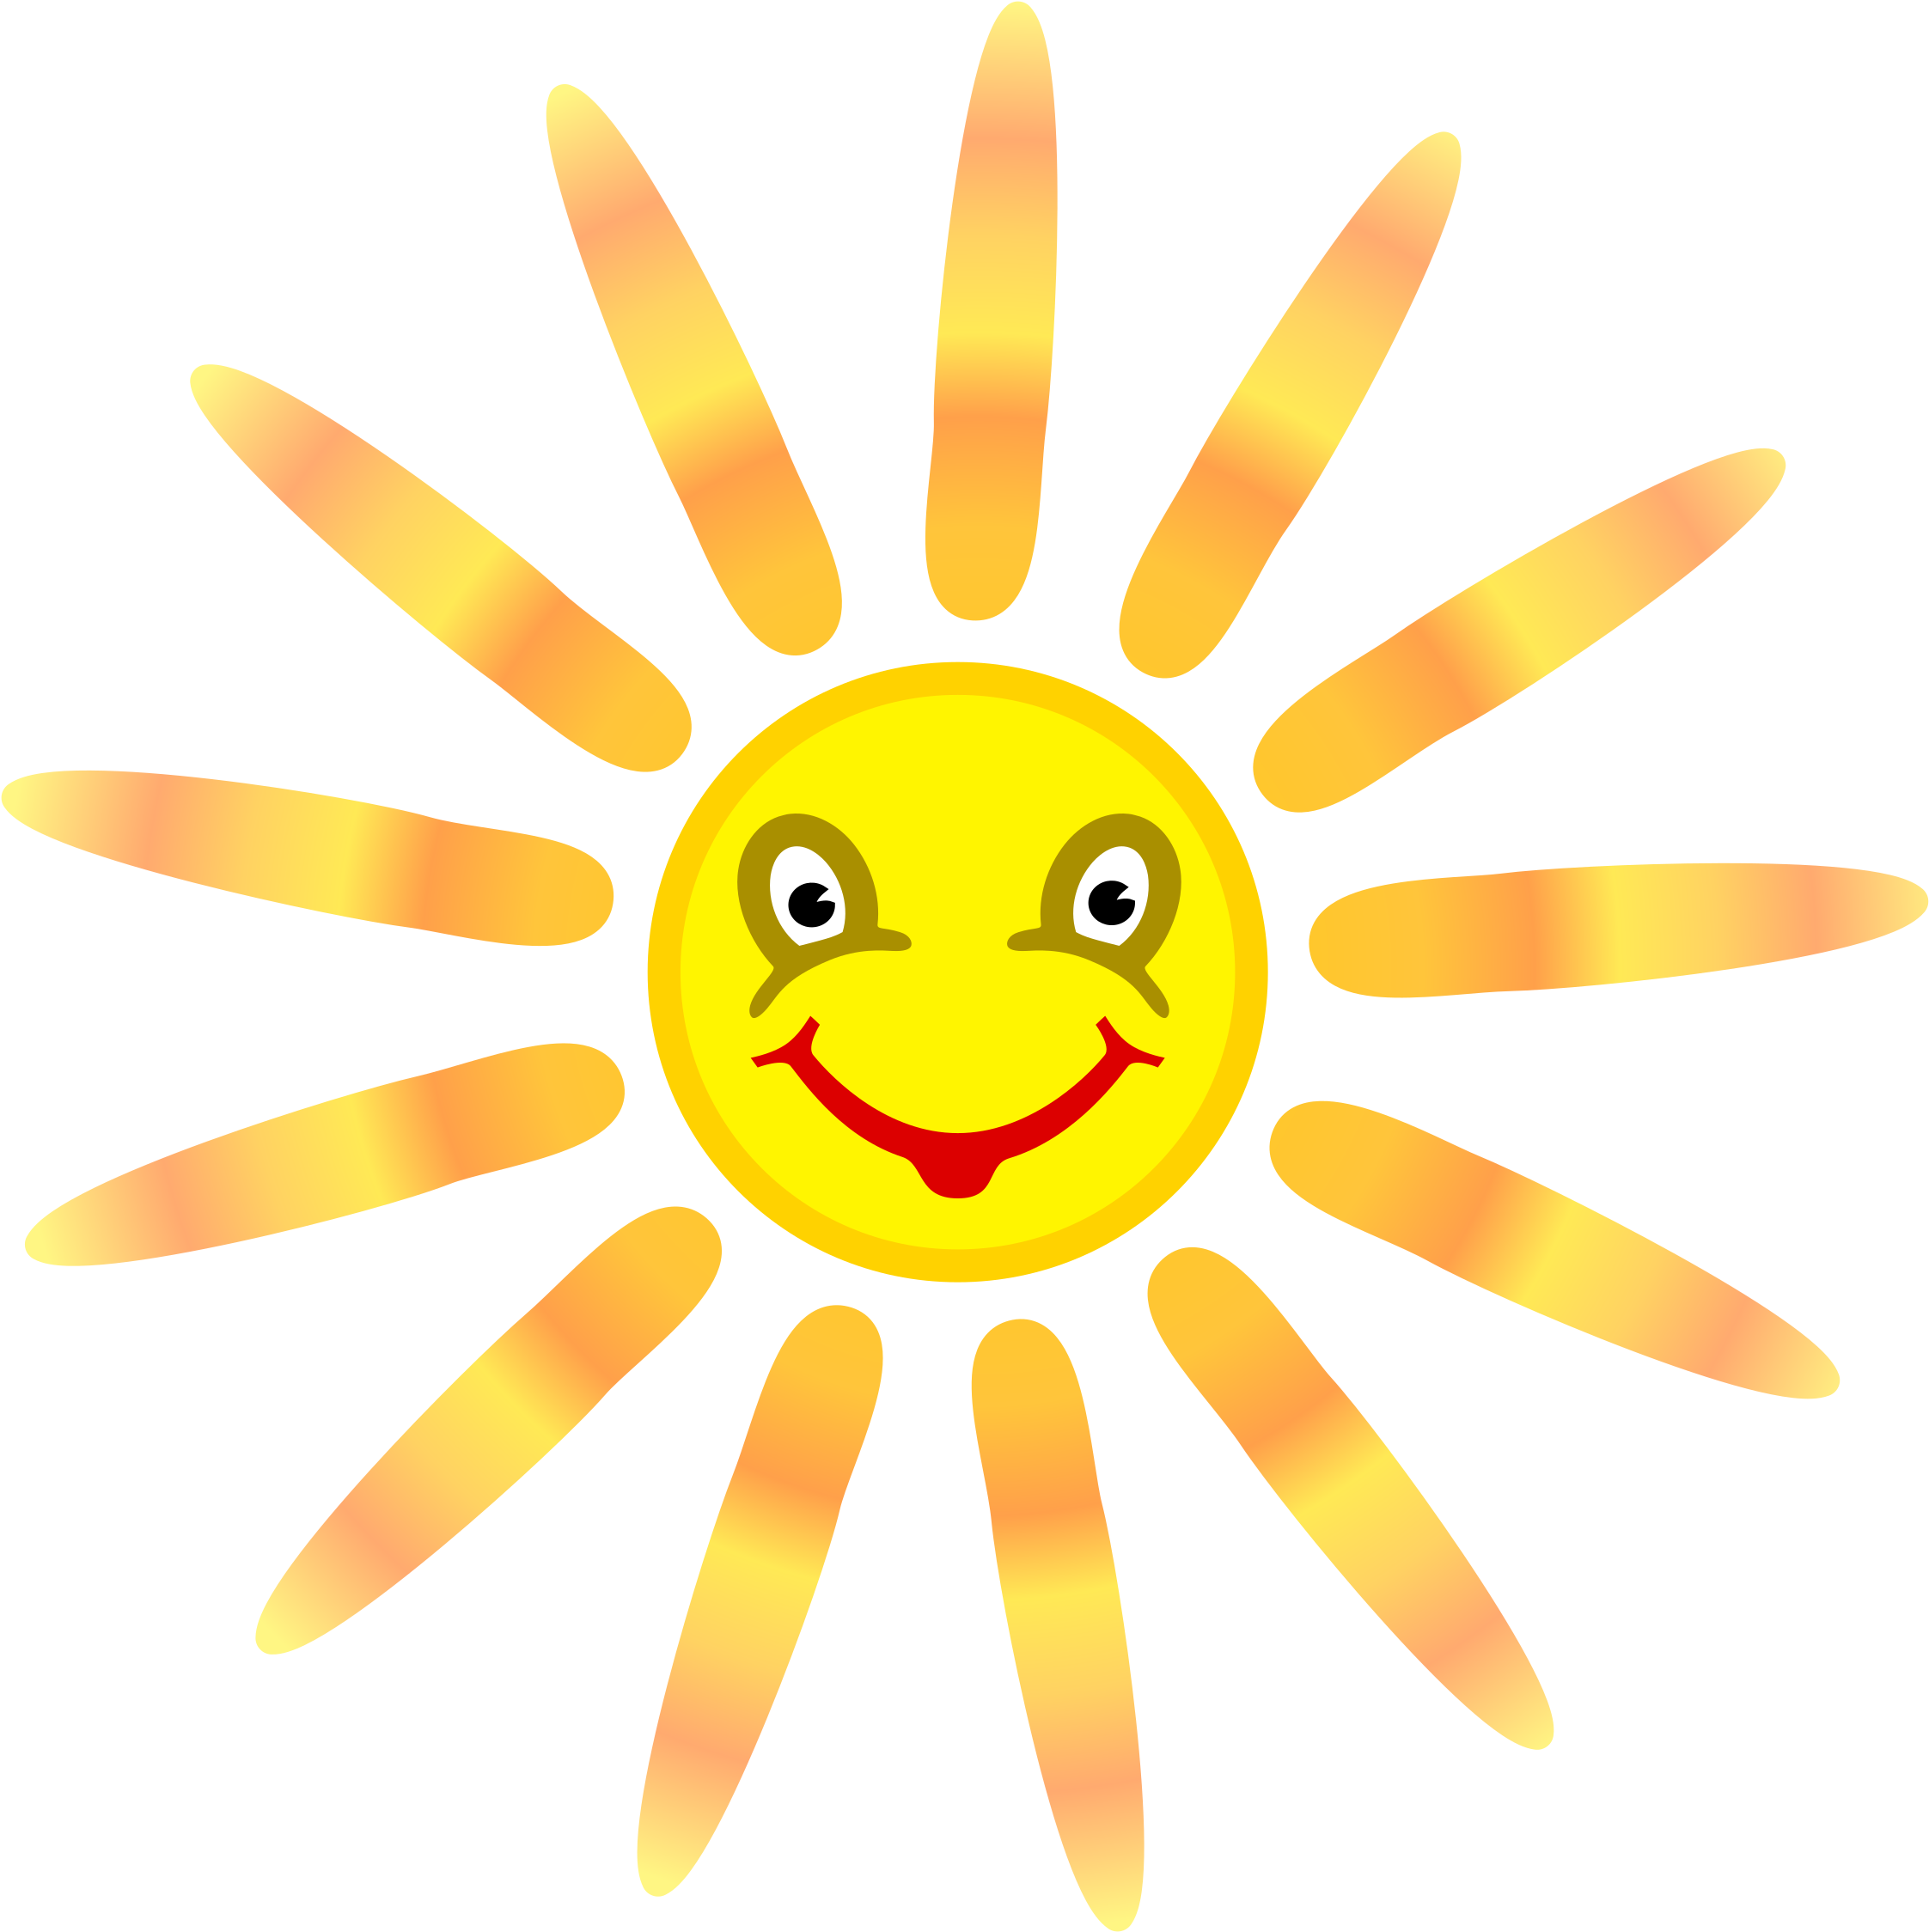 Aesthetic Sun Background PNG Image